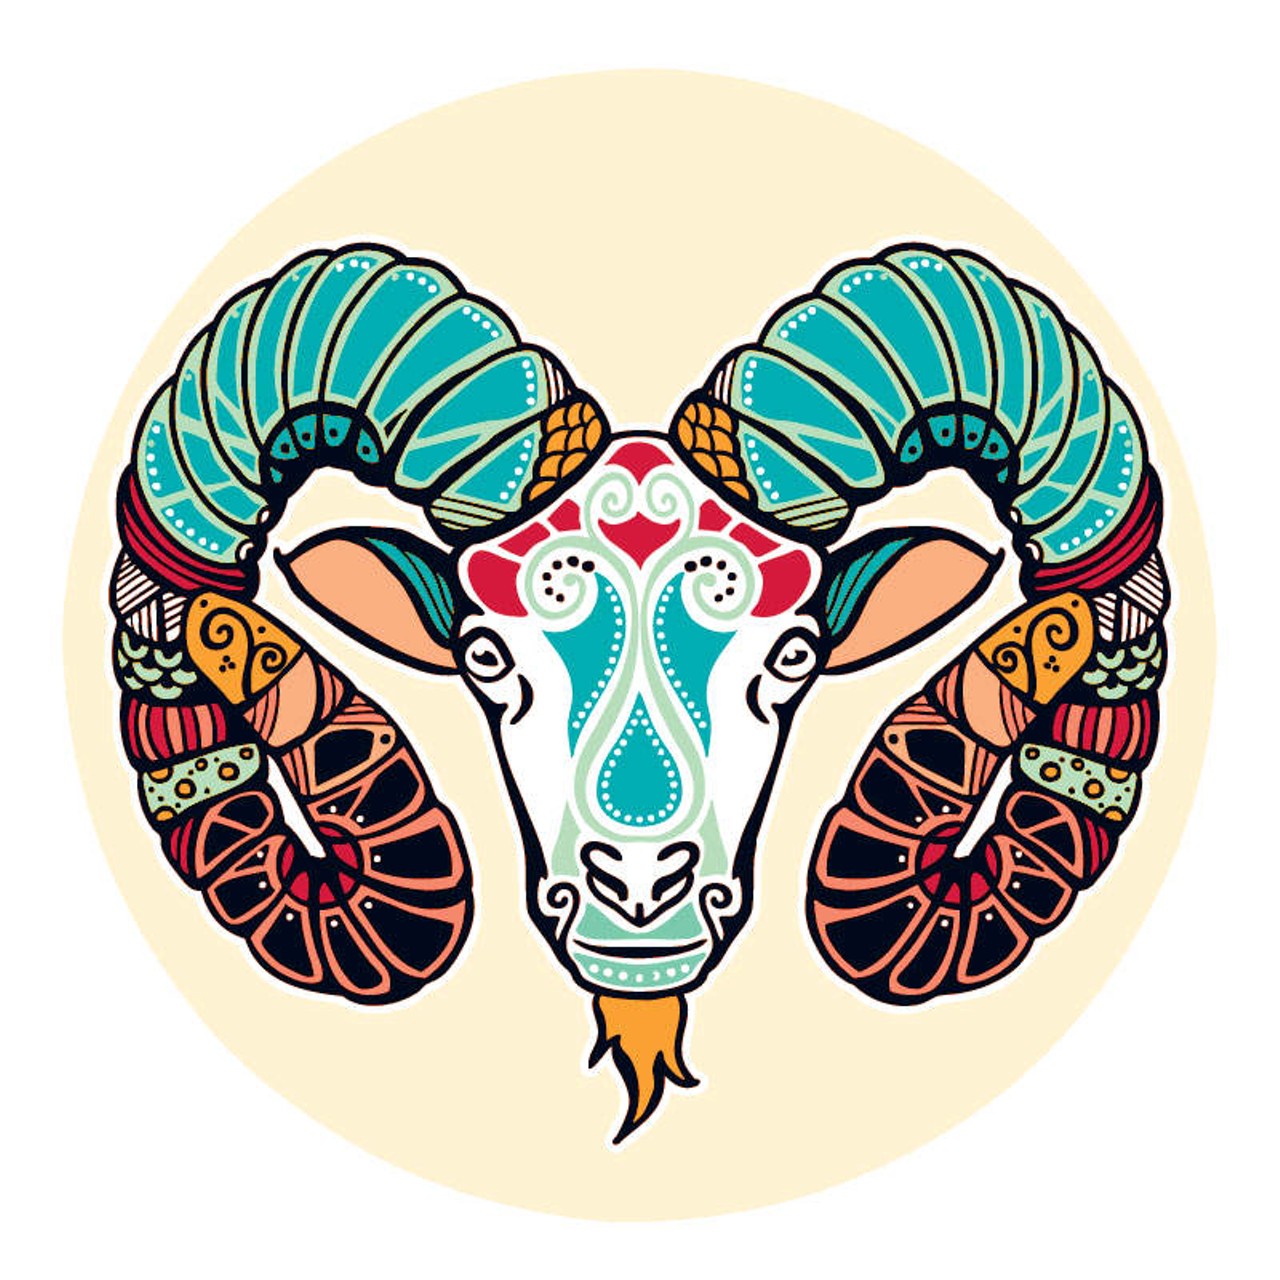 ARIES (March 21- April 20): 
You&#146;ve waited forever for someone to come around. If they could see this through your eyes they&#146;d know how you feel. Don&#146;t count on anything. They may be too stuck in their own little fantasy to be there for anyone.